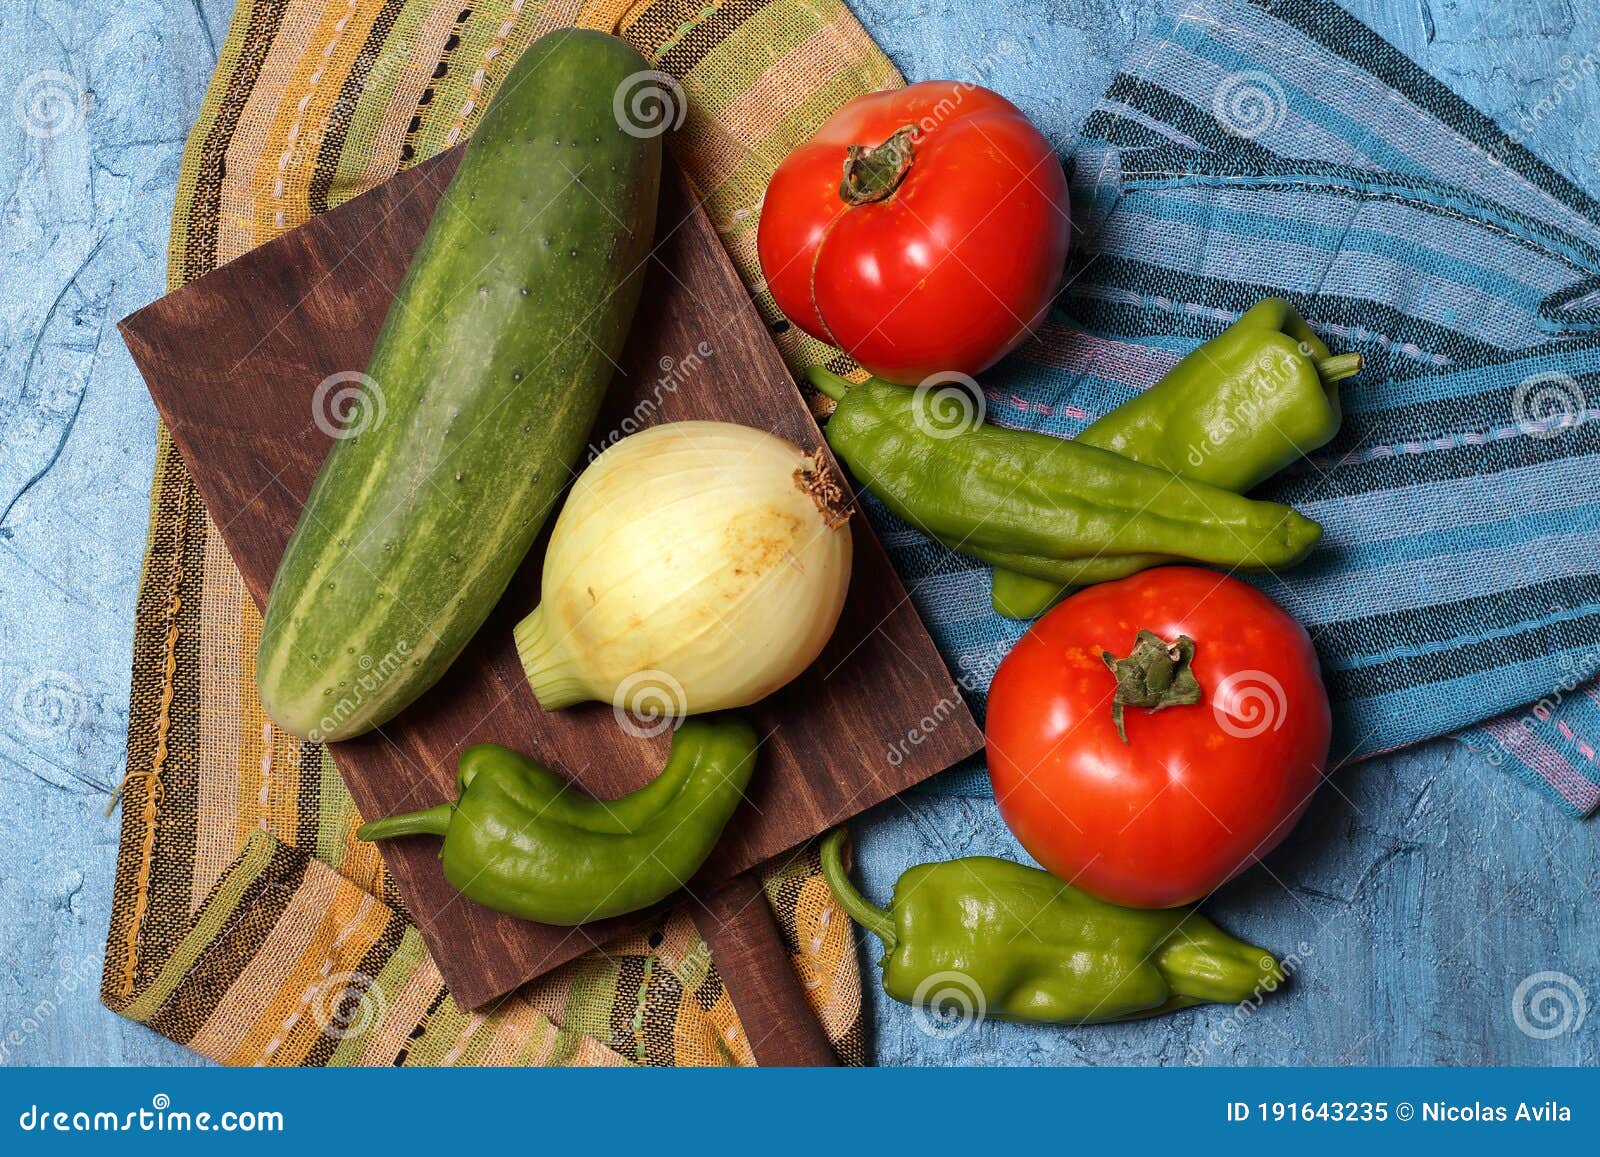 tomatoes, zucchini, onion and pepper and wooden board